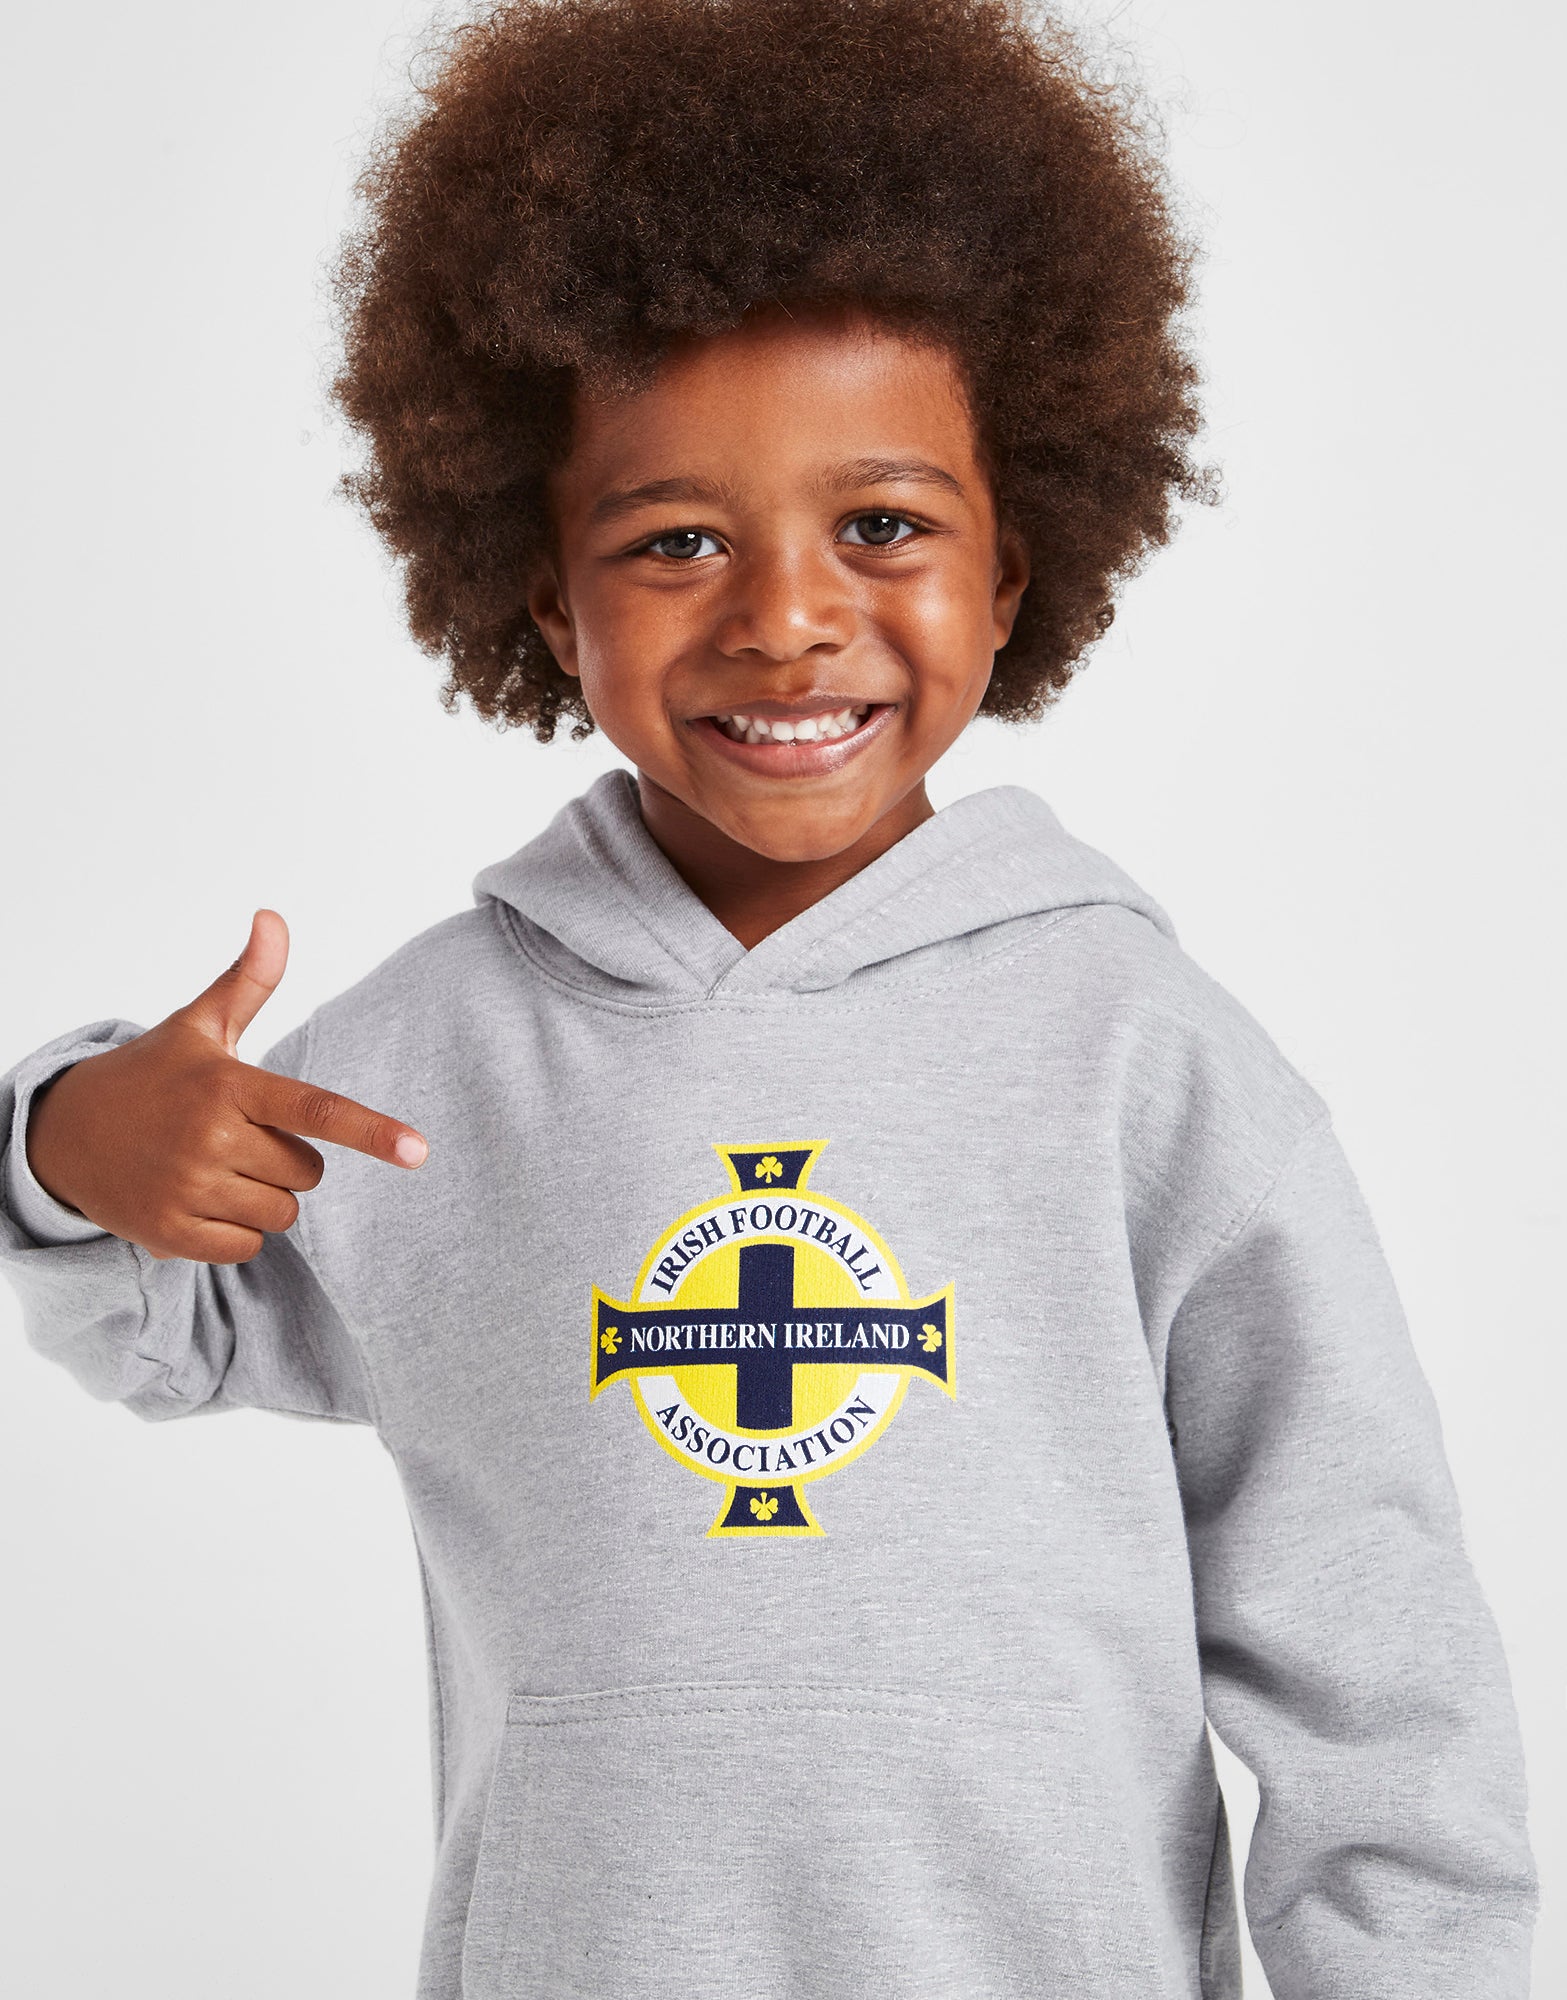 Official Northern Ireland Crest Hoodie Kids - Grey Marl - The World Football Store